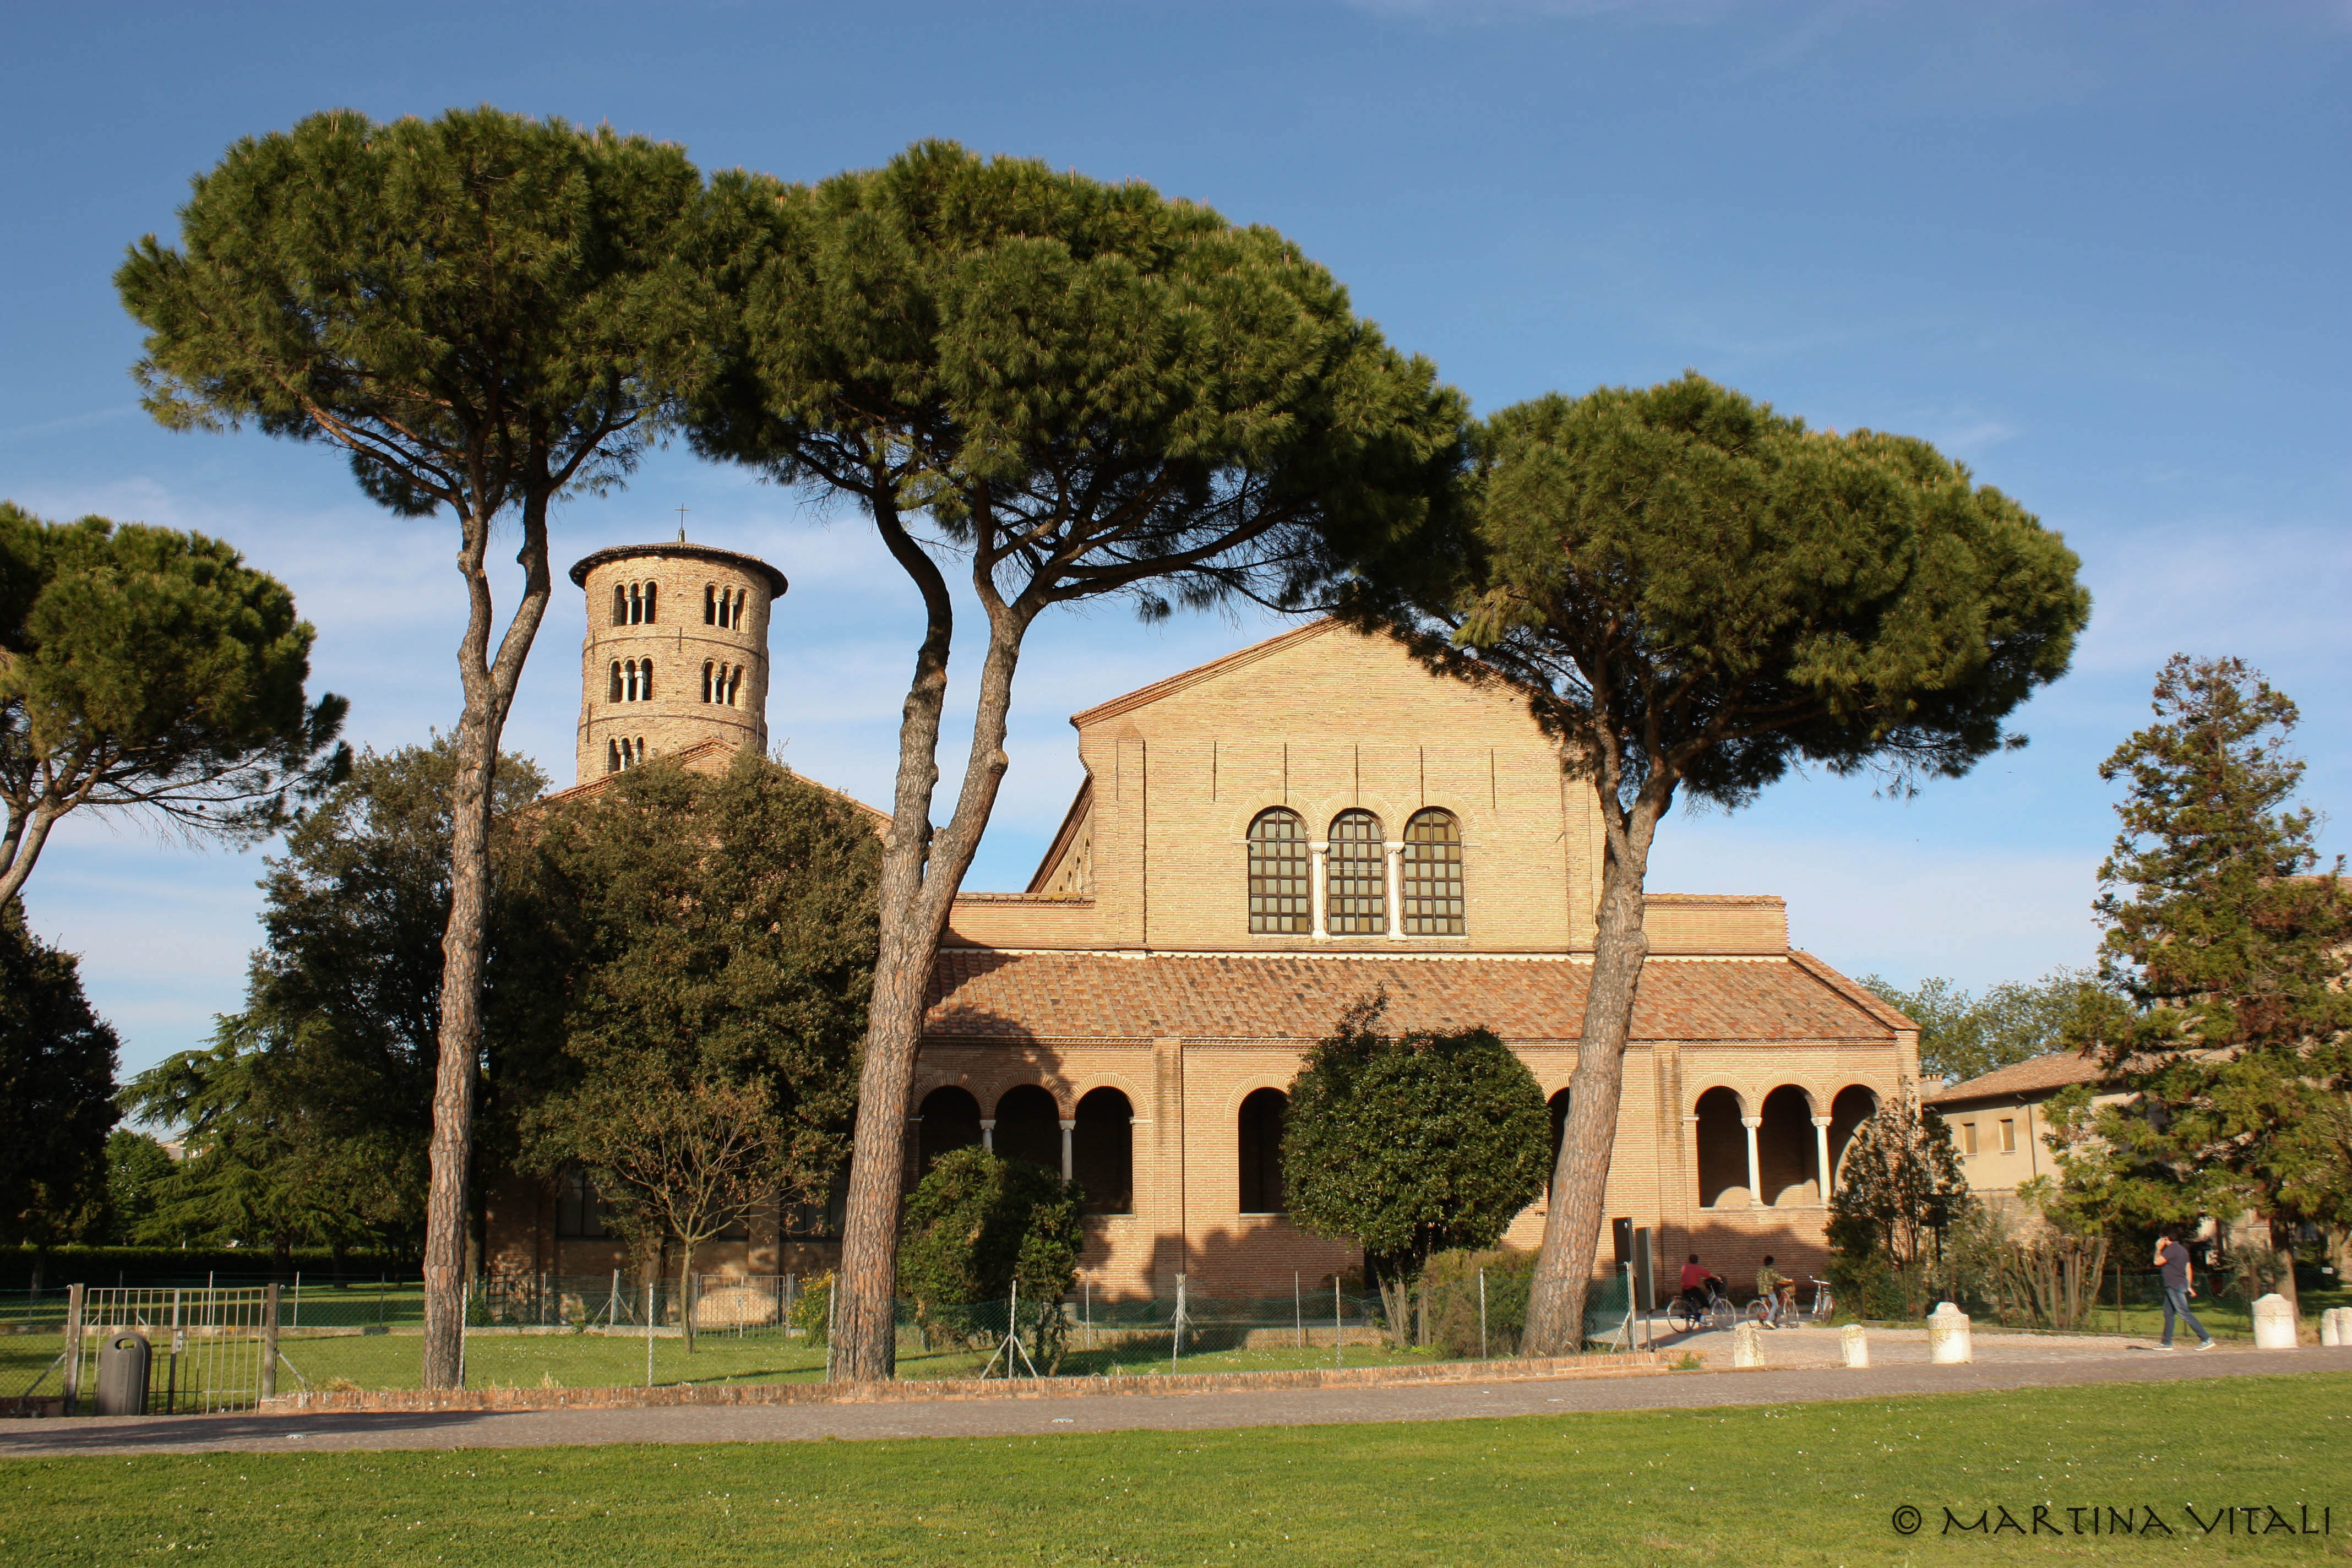 Ravenna: how to get there - Sitabus.it
